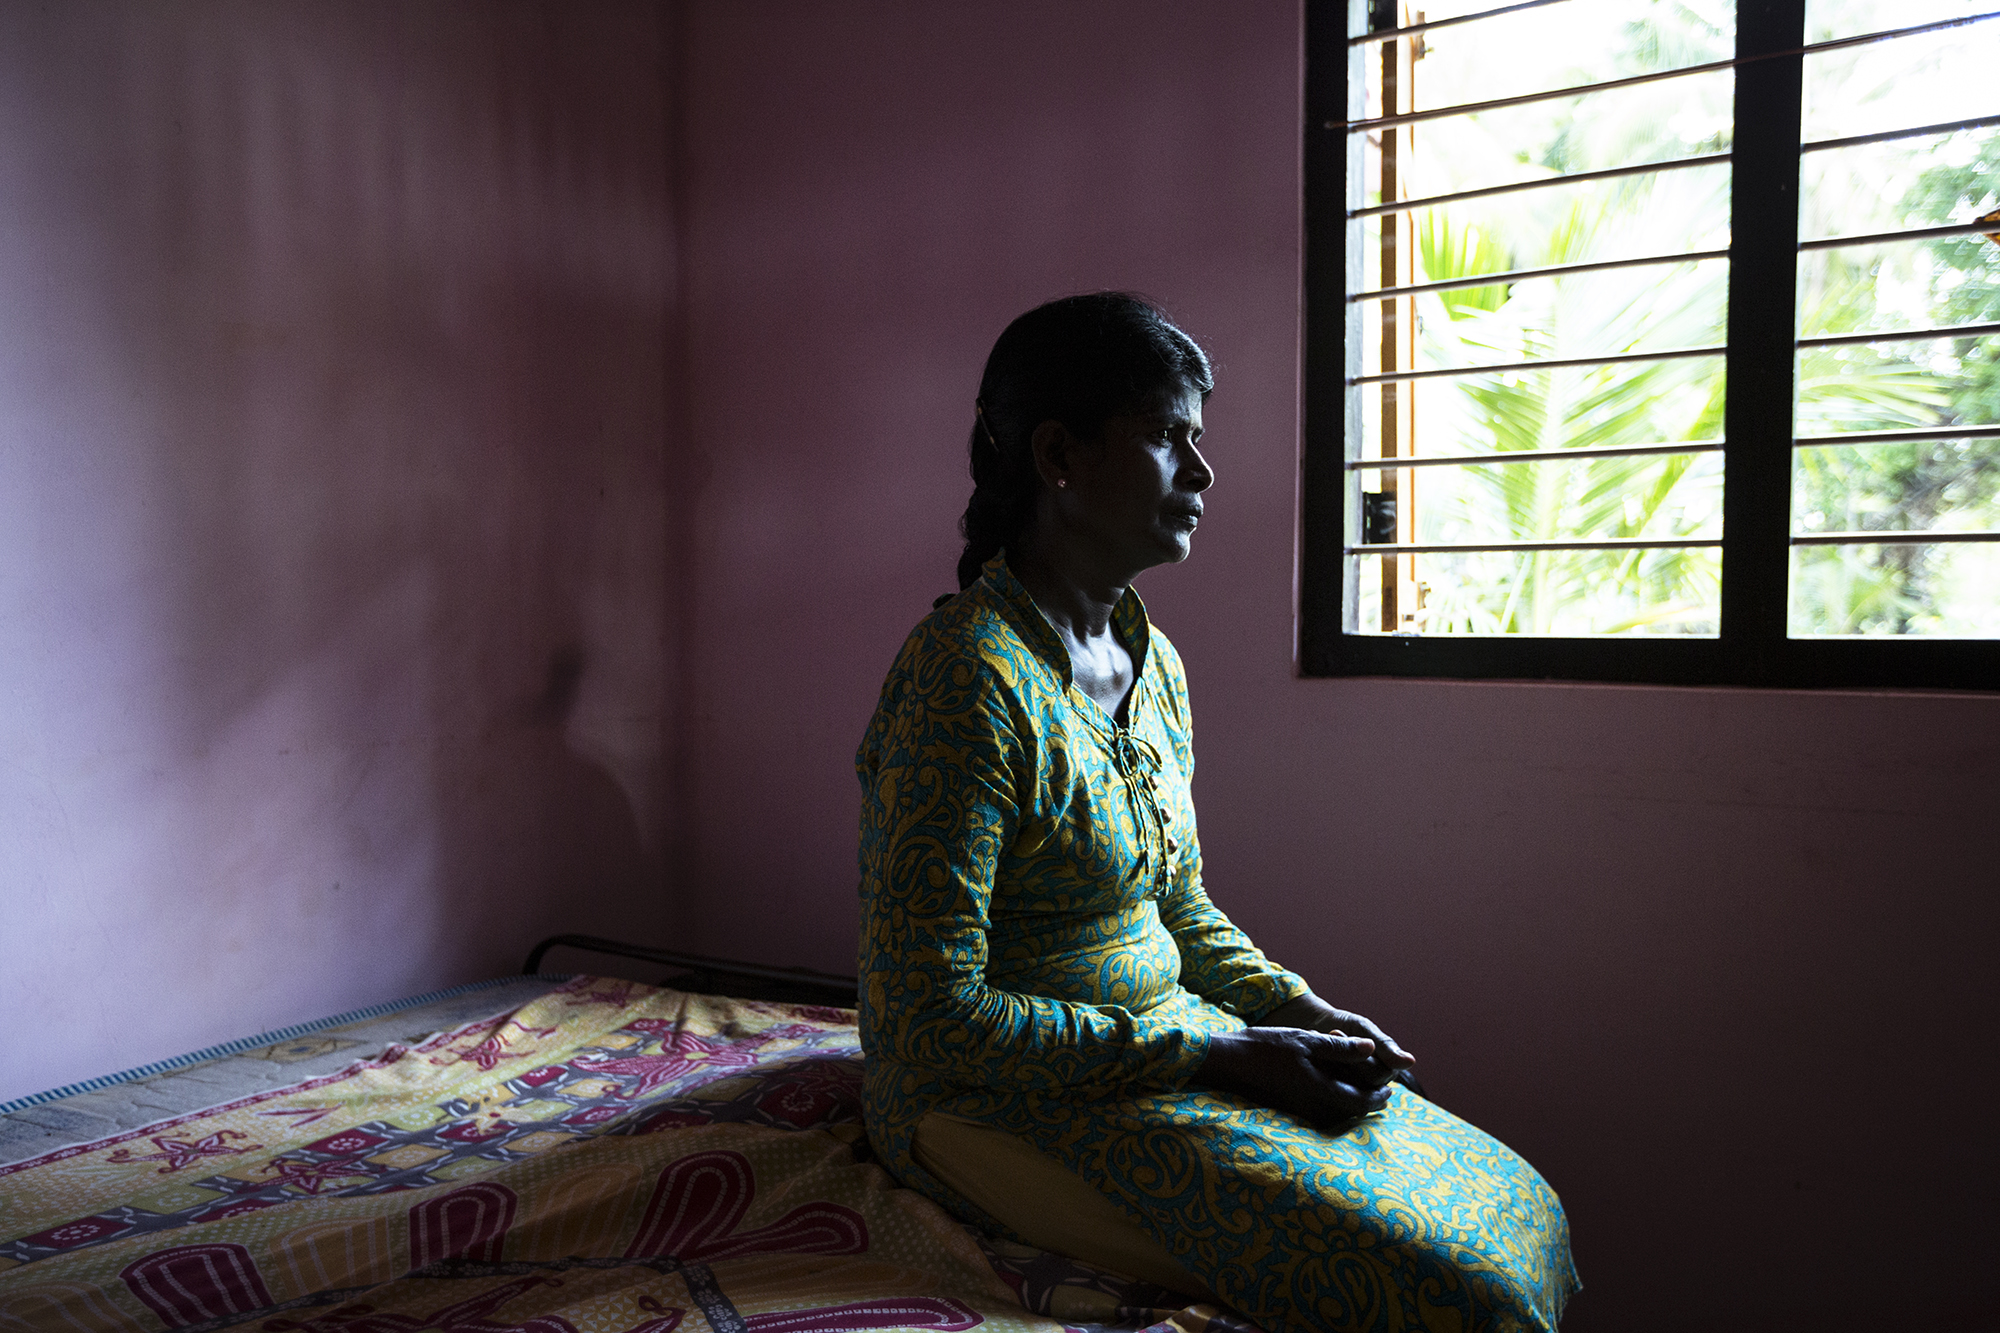  Iruthayarani, 36. Iruthayarani's husband was shot and killed in an open field while she was pregnant with their first child. She and her infant son lived in Cheddikulam displacement camp until they left the camp in 2012 to live on a small plot of ju